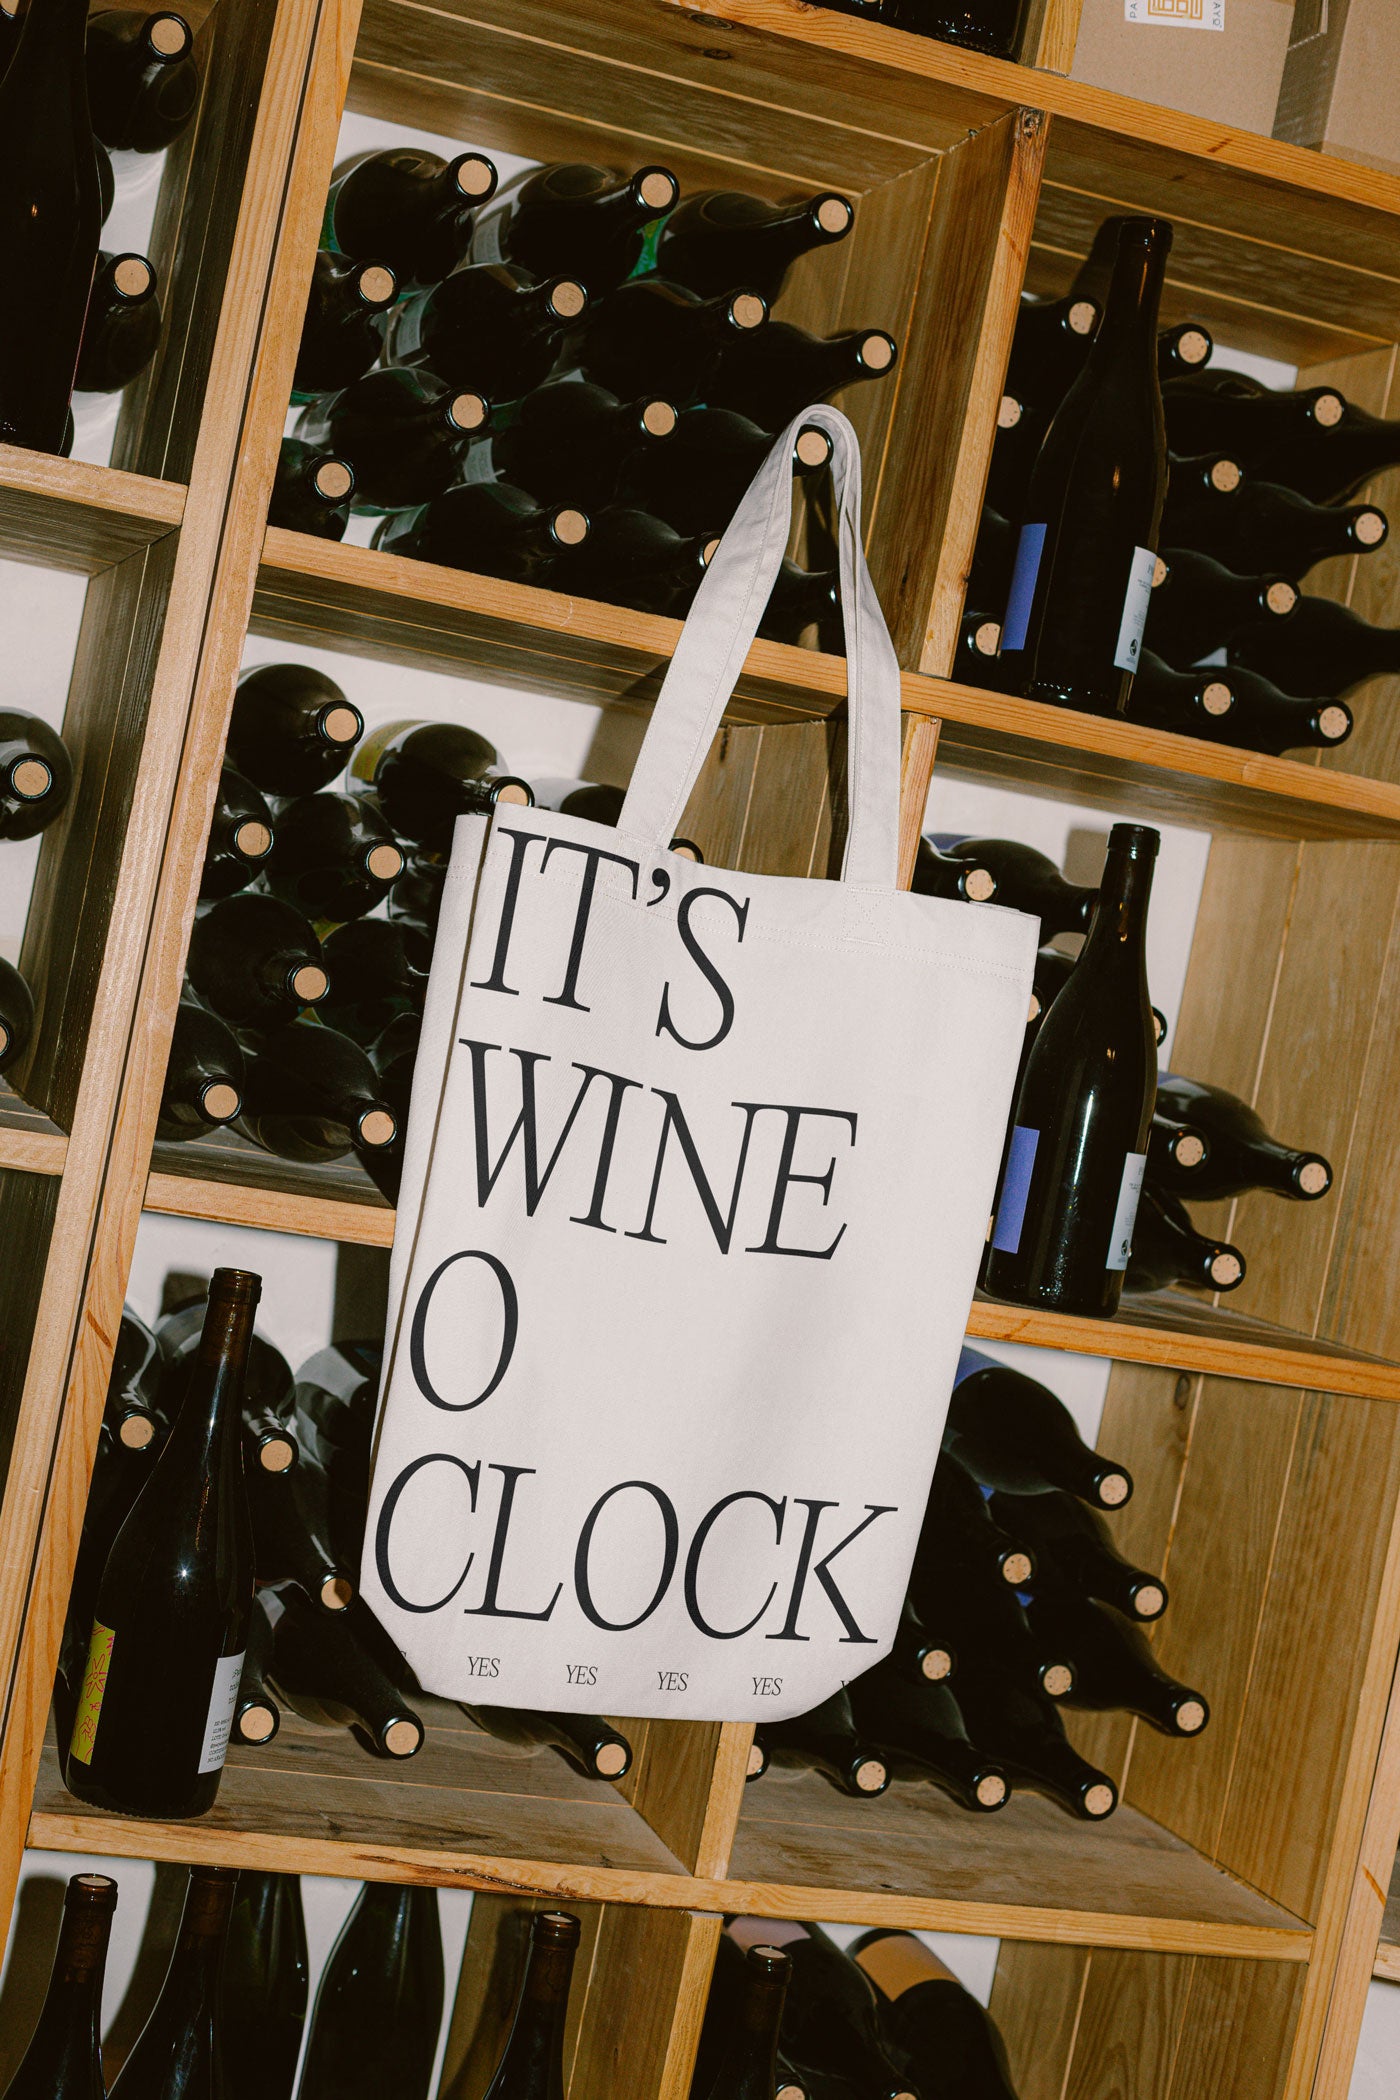 Tote bag in a wine cellar that says "It's wine o clock"